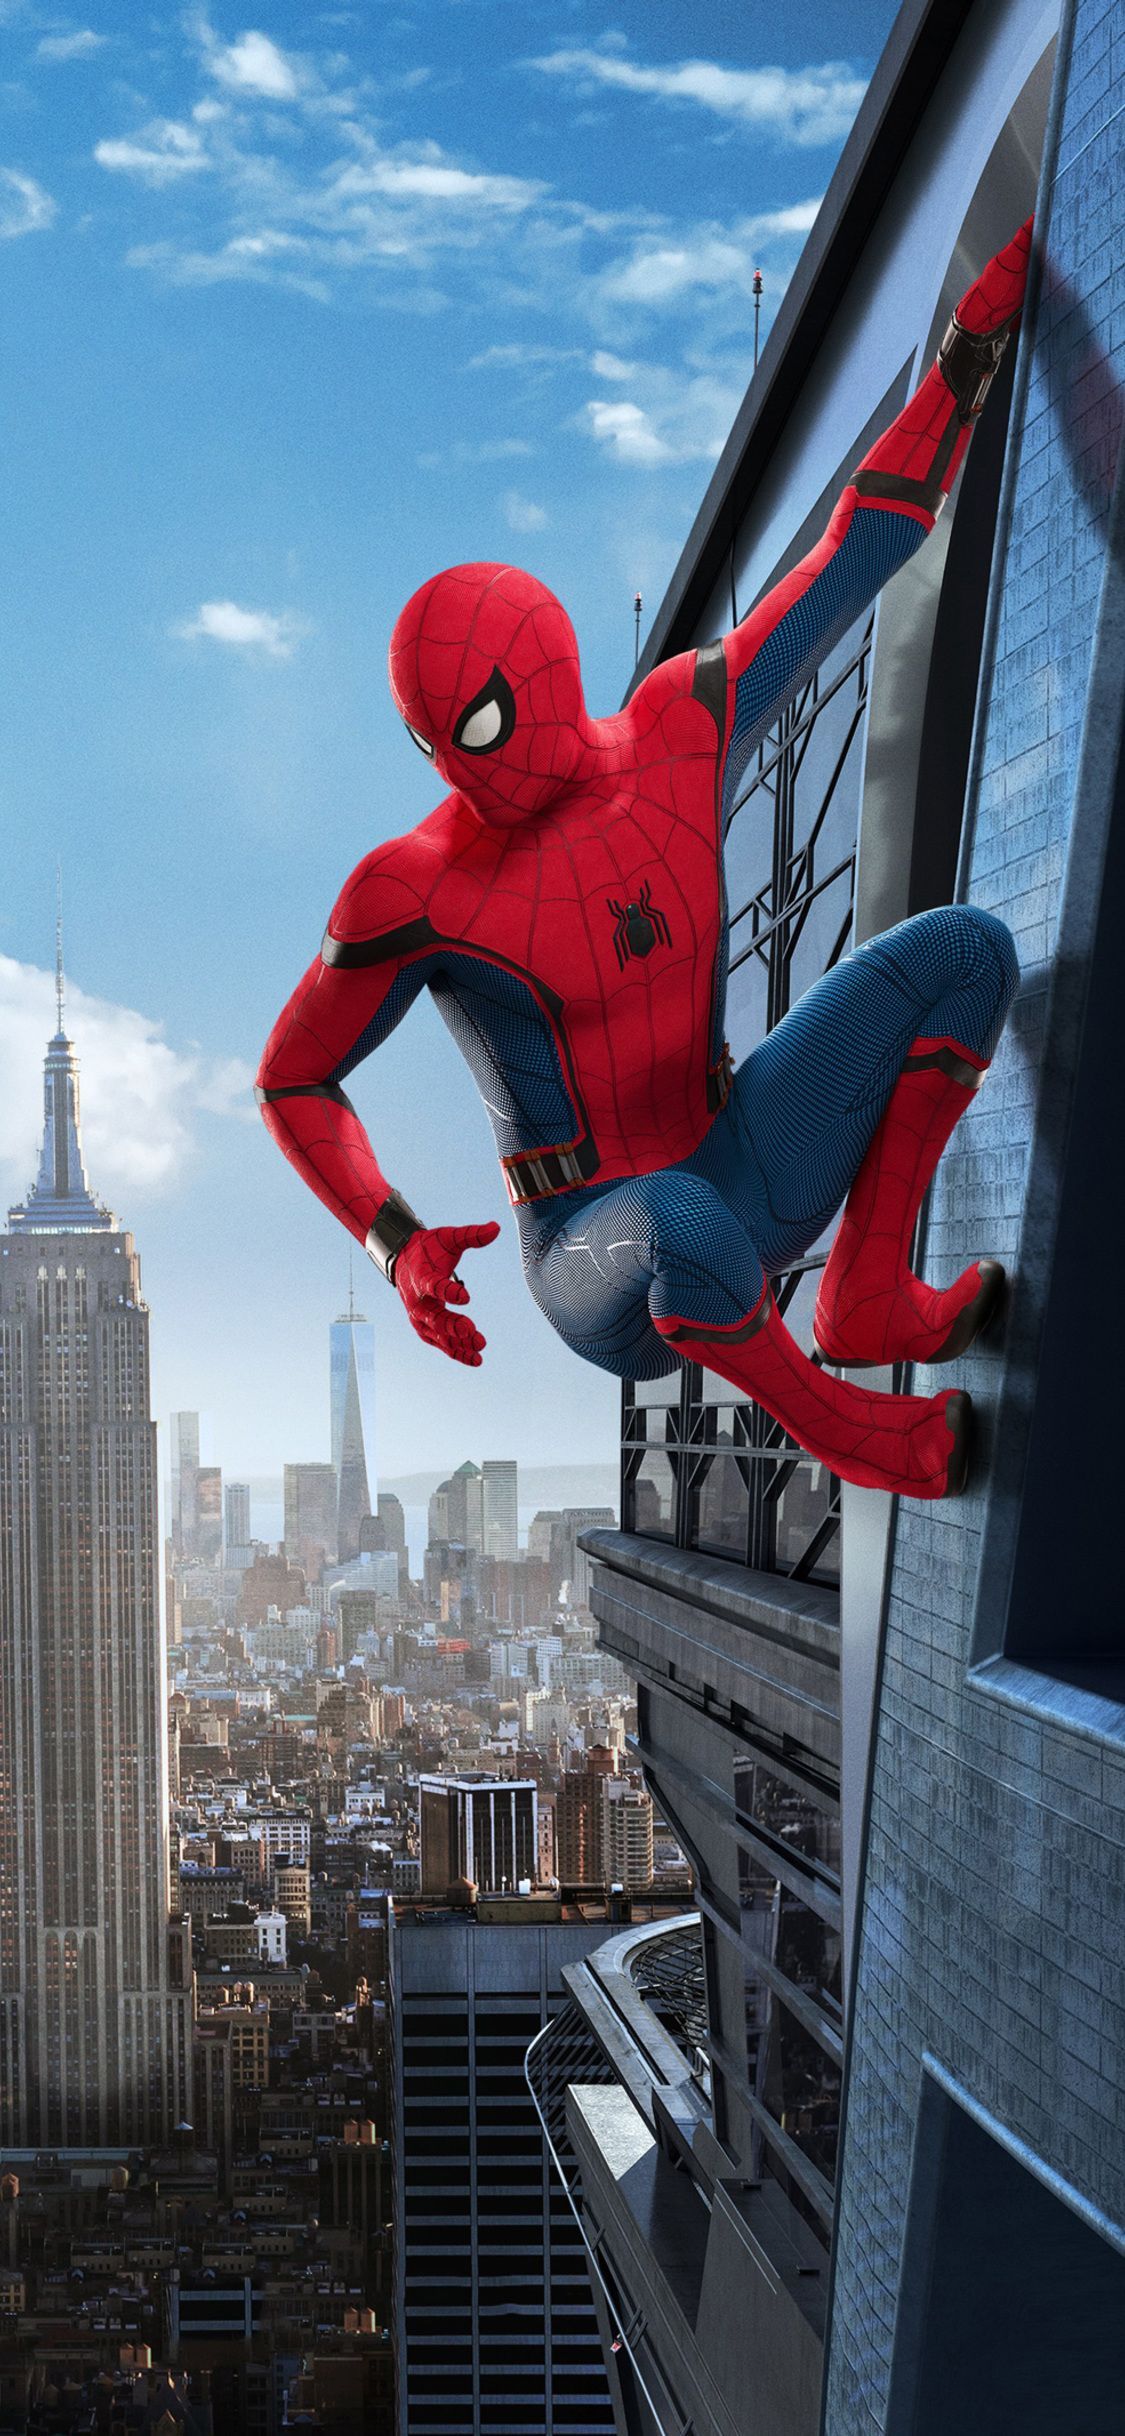 Spiderman Homecoming Poster Hd Wallpapers